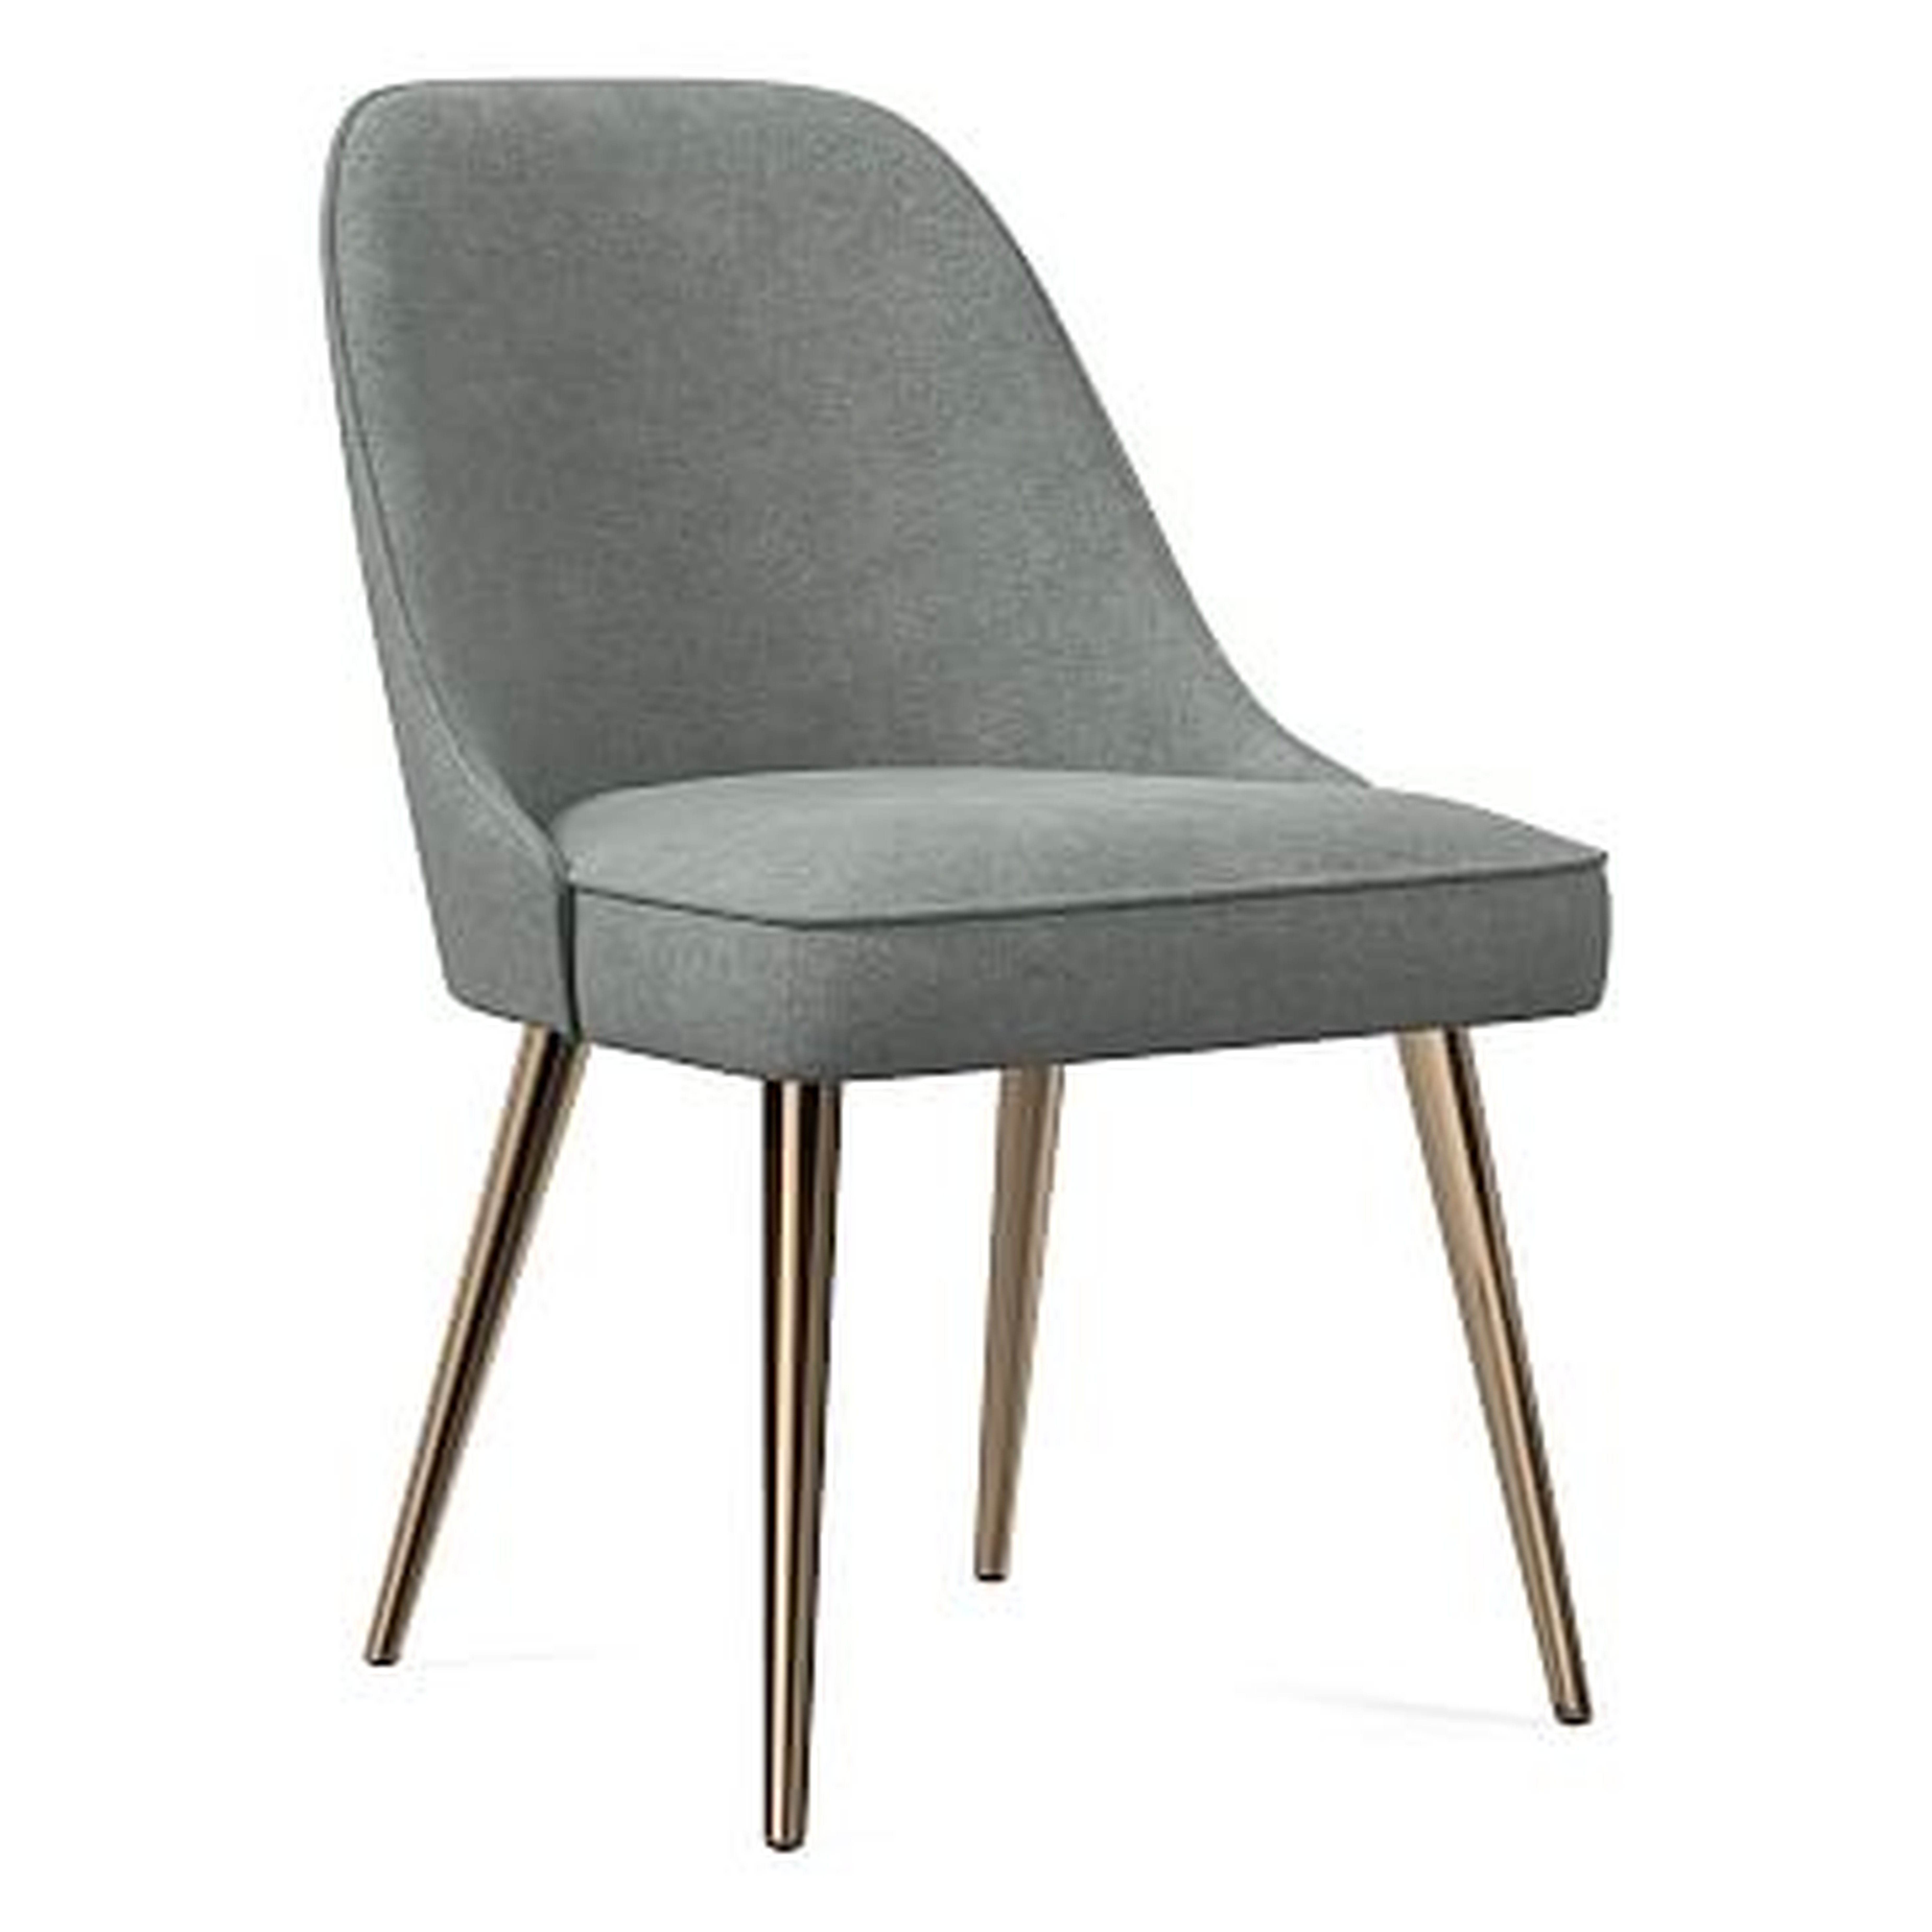 Mid-Century Upholstered Dining Chair, Distressed Velvet, Mineral Gray, Oil Rubbed Bronze - West Elm